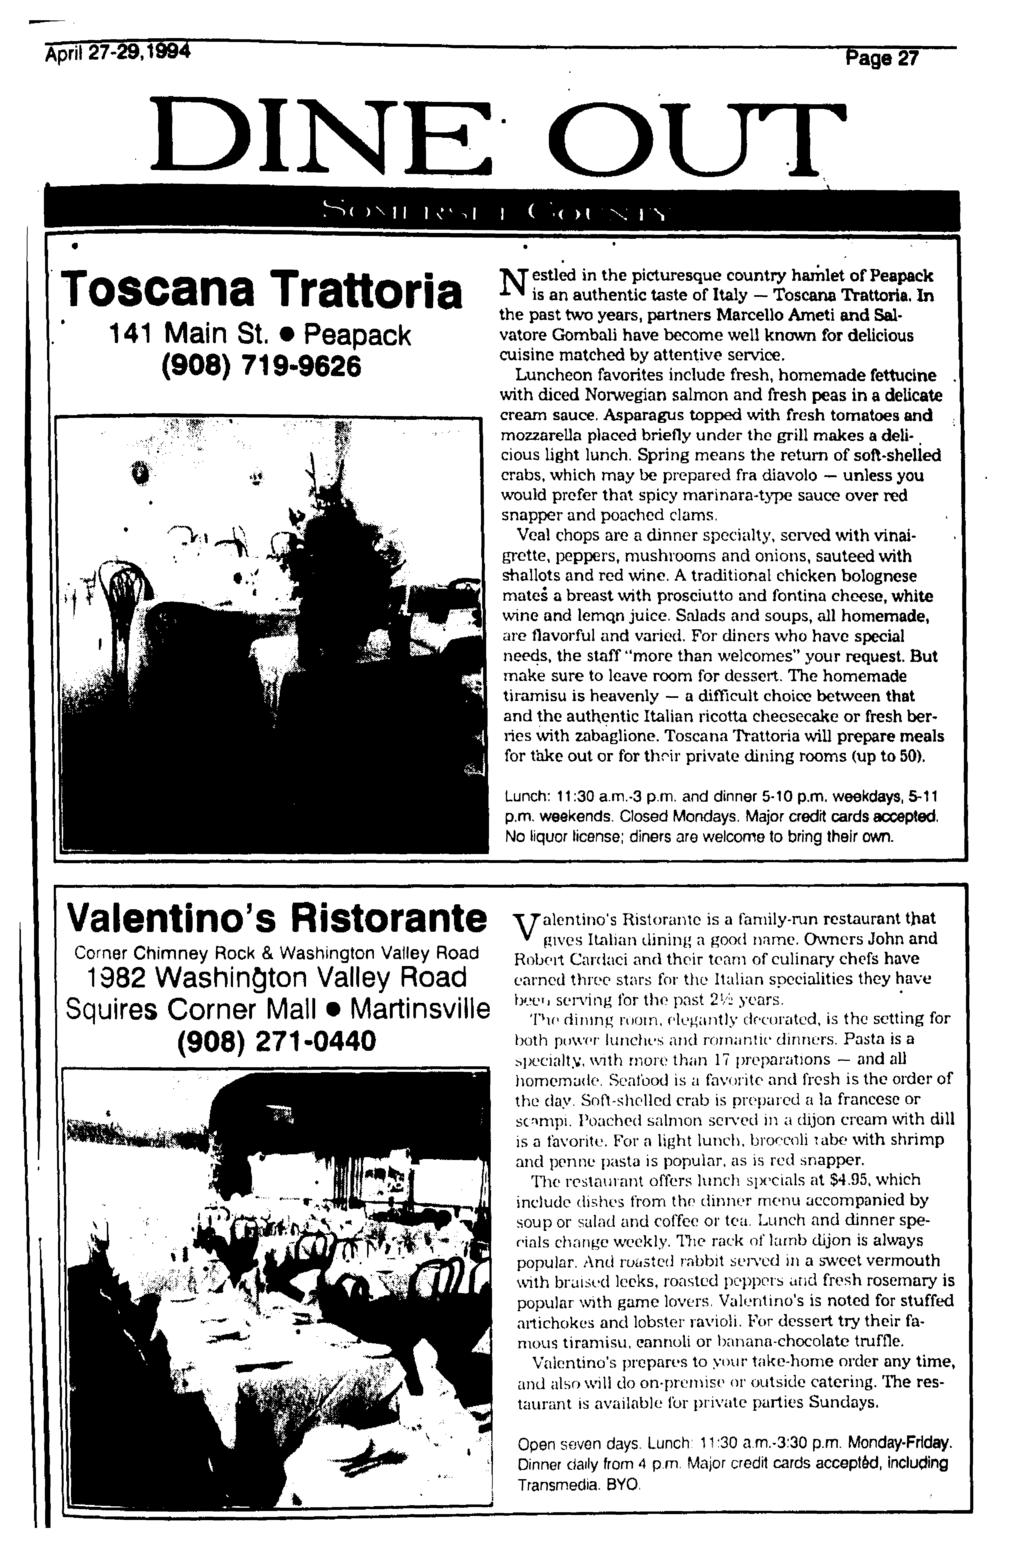 April 27-29.1994 Page 27 DINE OUT Toscana Trattoria 141 Main St. Peapack (908) 719-9626 "VTestled in the picturesque country hamlet of Peapack ^ is an authentic taste of Italy Toscana Trattoria.